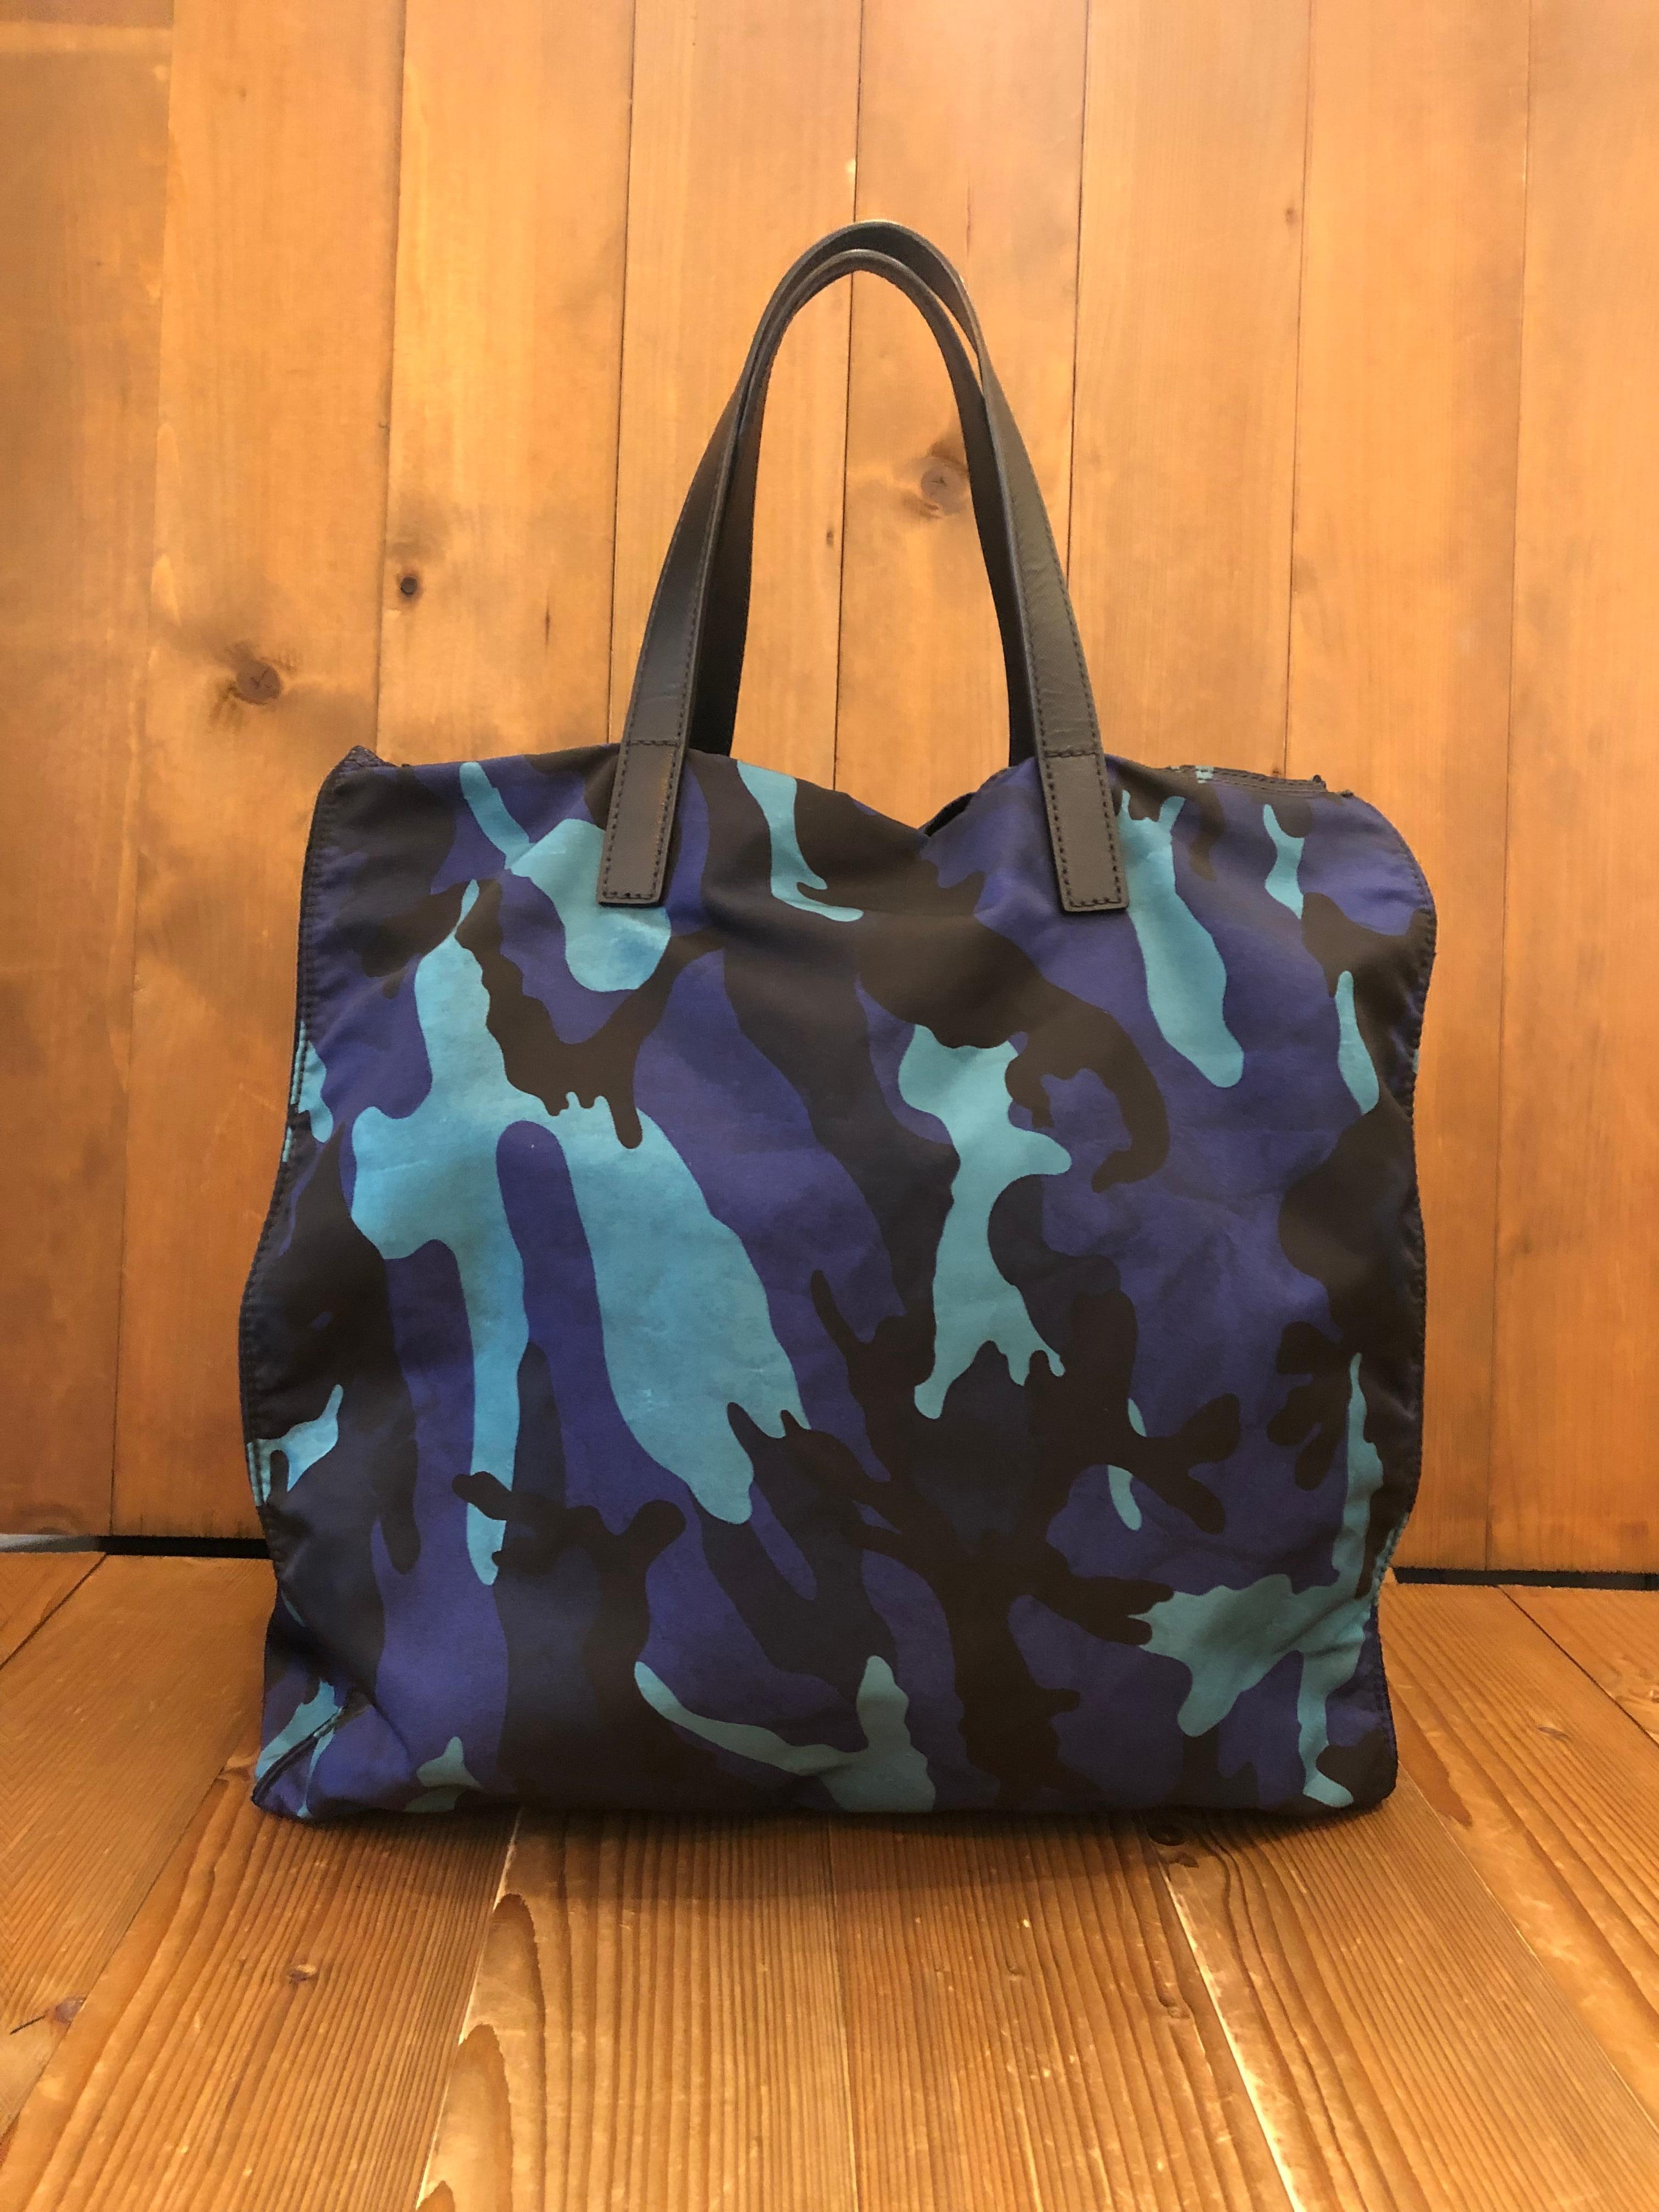 This PRADA two-way tote bag is crafted of camouflage polyester in navy/blue and Saffiano leather. This light-weight tote bag features matte black hardware with Saffiano leather handles and a detachable shoulder strap that allows you to carry it as a